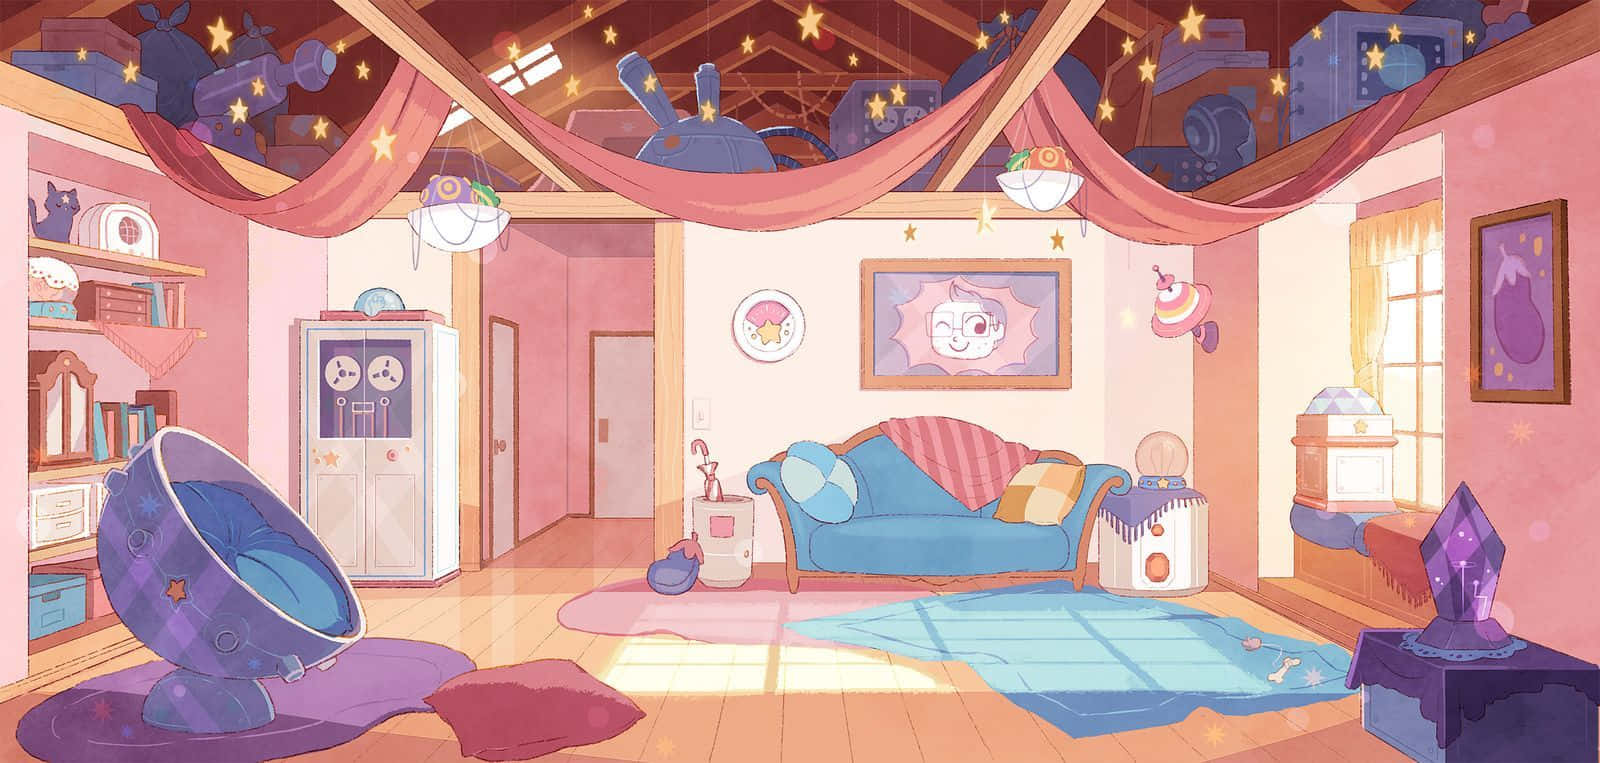 A Cartoon Room With A Lot Of Furniture And Decorations